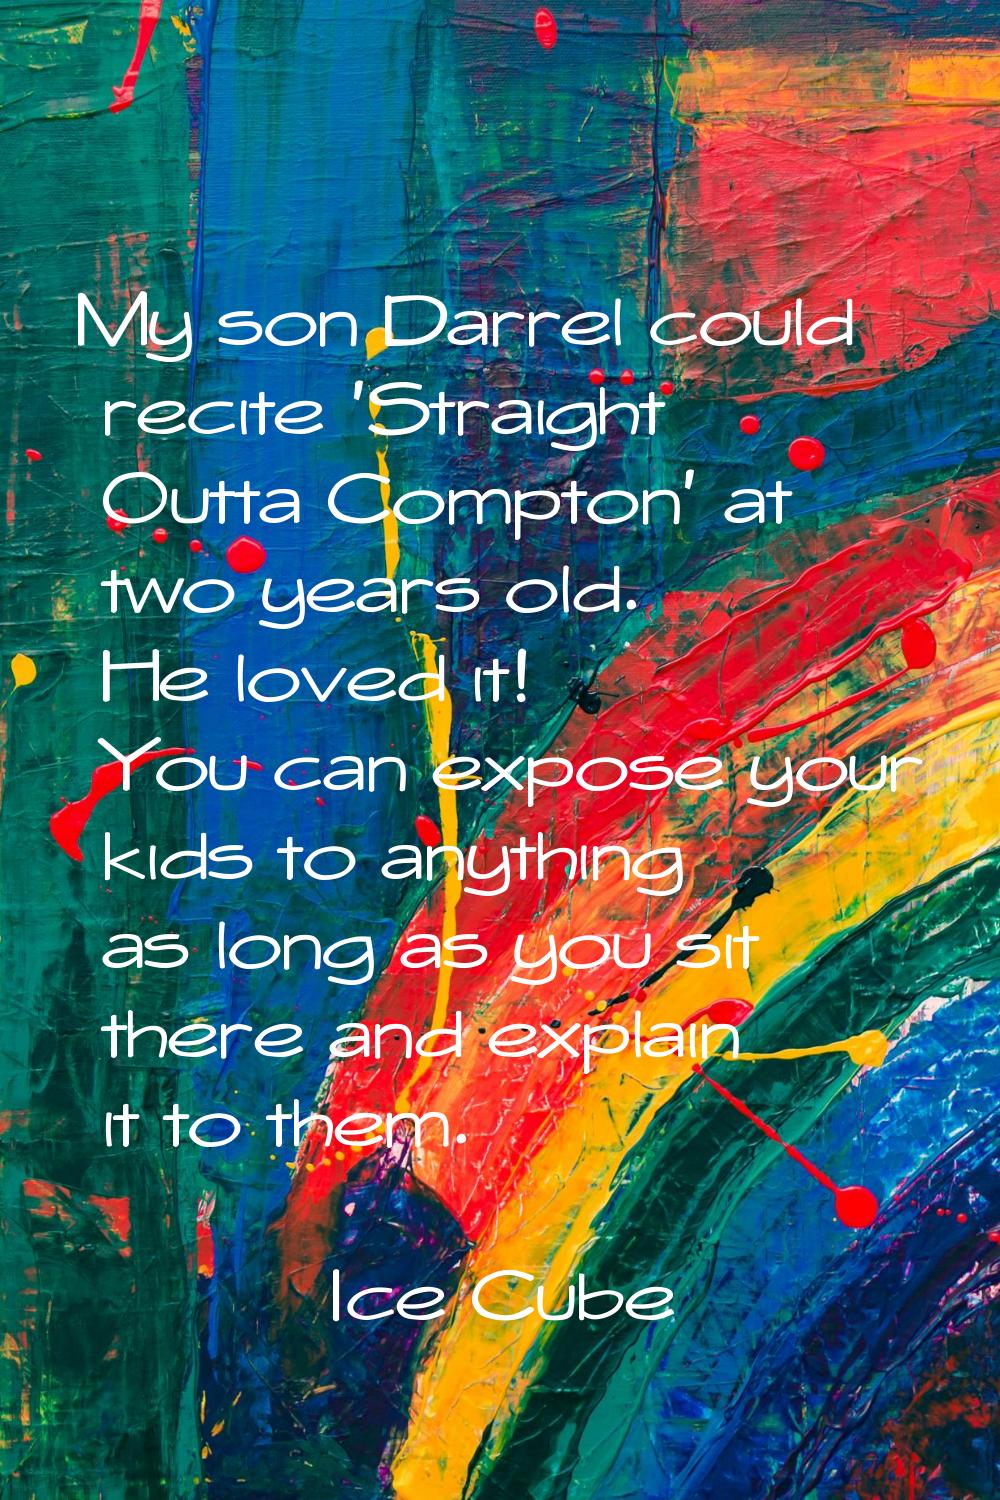 My son Darrel could recite 'Straight Outta Compton' at two years old. He loved it! You can expose y